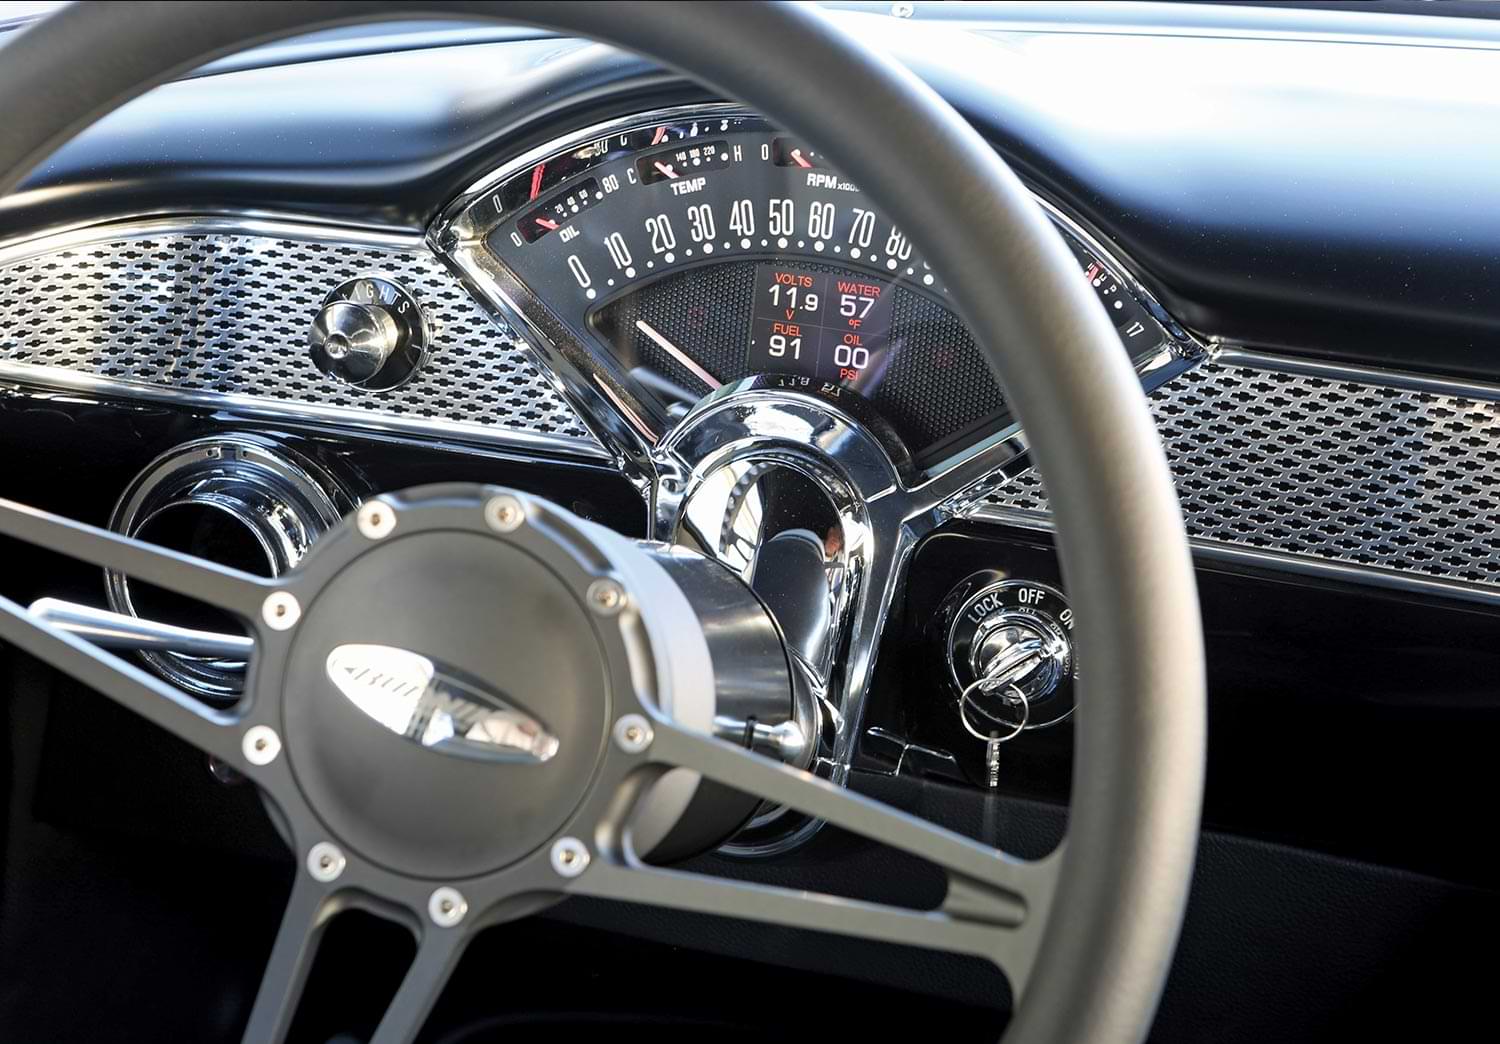 the ’55 Chevy steering wheel and gauges